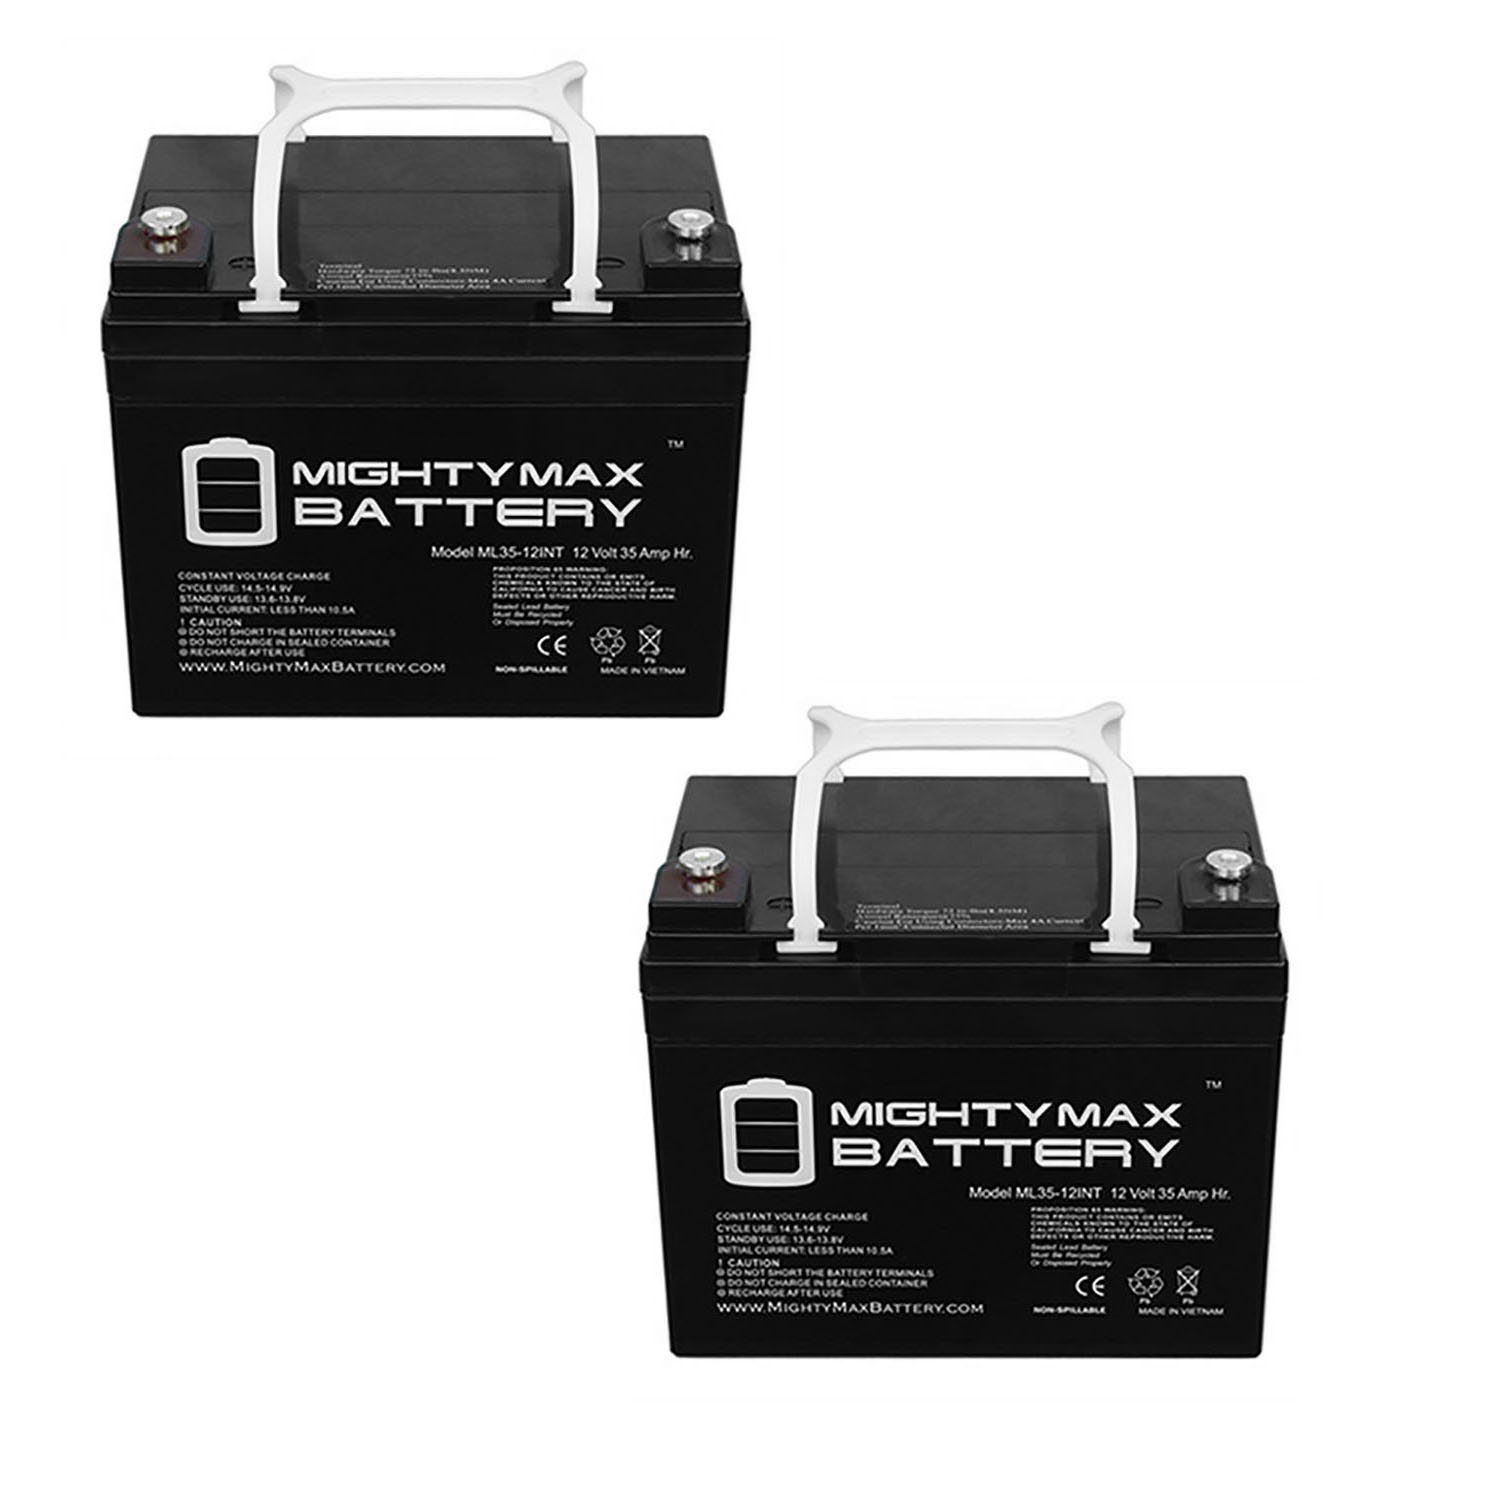 12V 35AH INT Replacement Battery for Cub Cadet 182 - 2 Pack